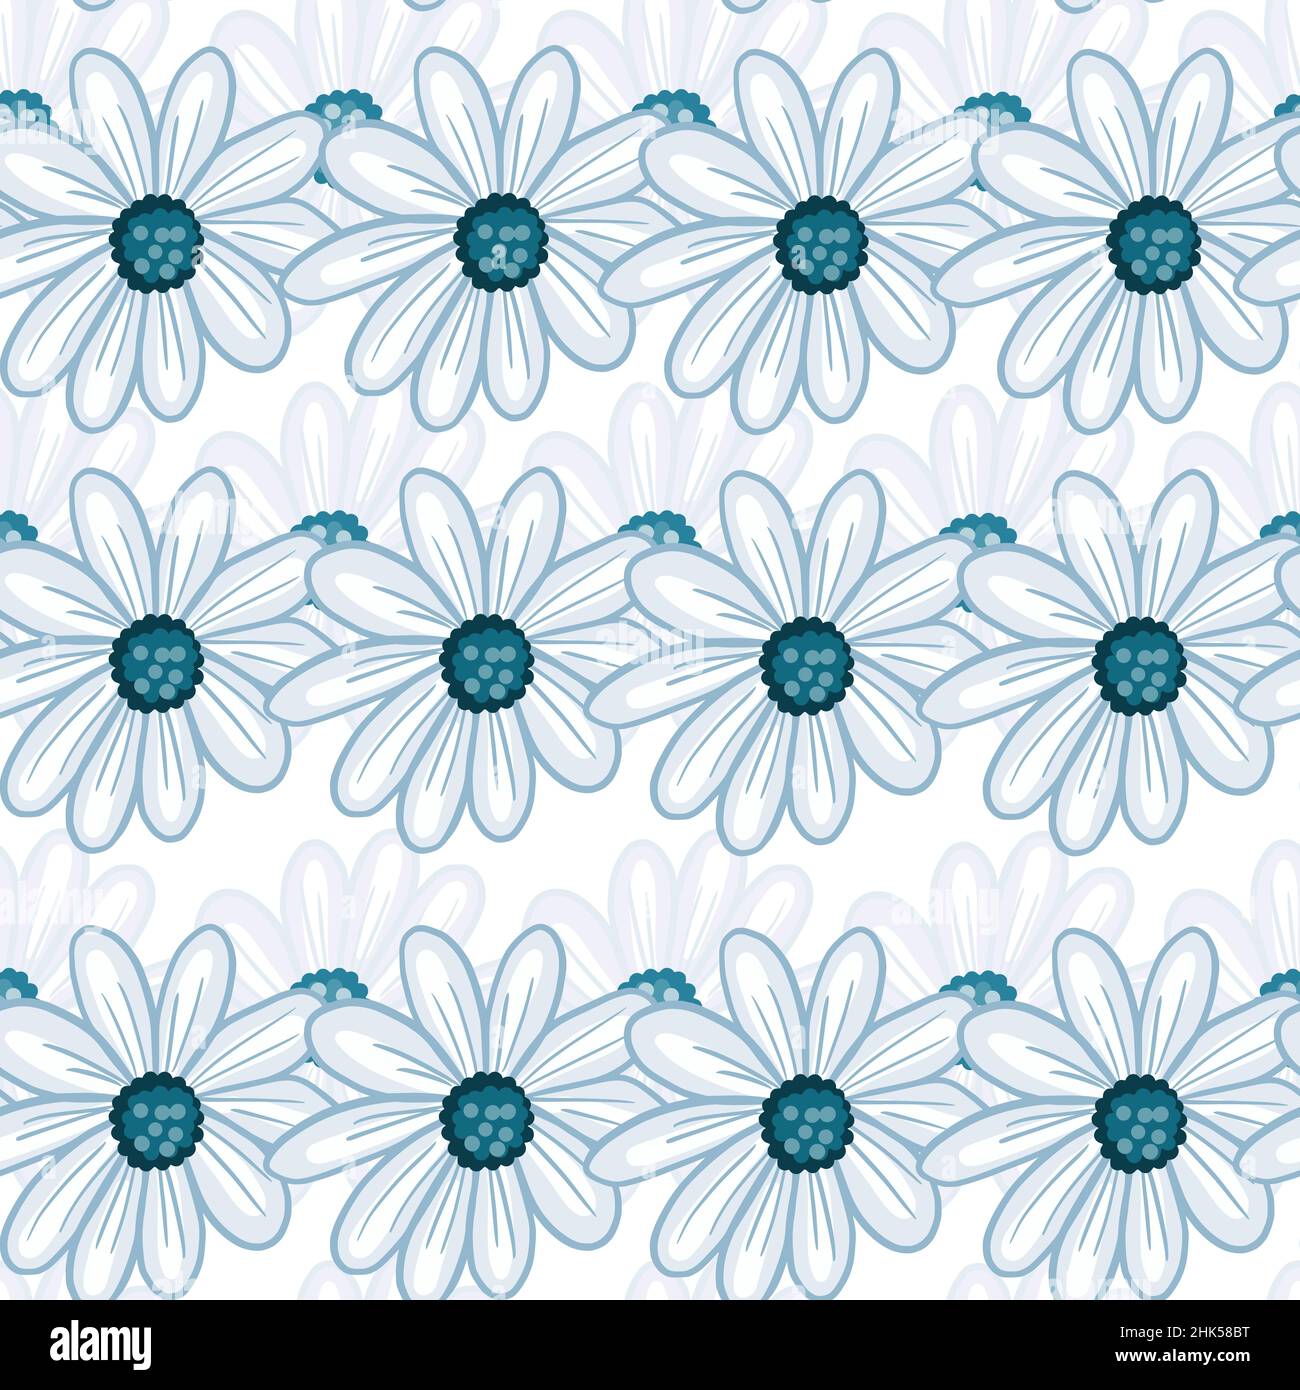 Simple floral seamless pattern with blue contoured daisy flowers print. White background. Hand drawn style. Stock illustration. Vector design for text Stock Vector